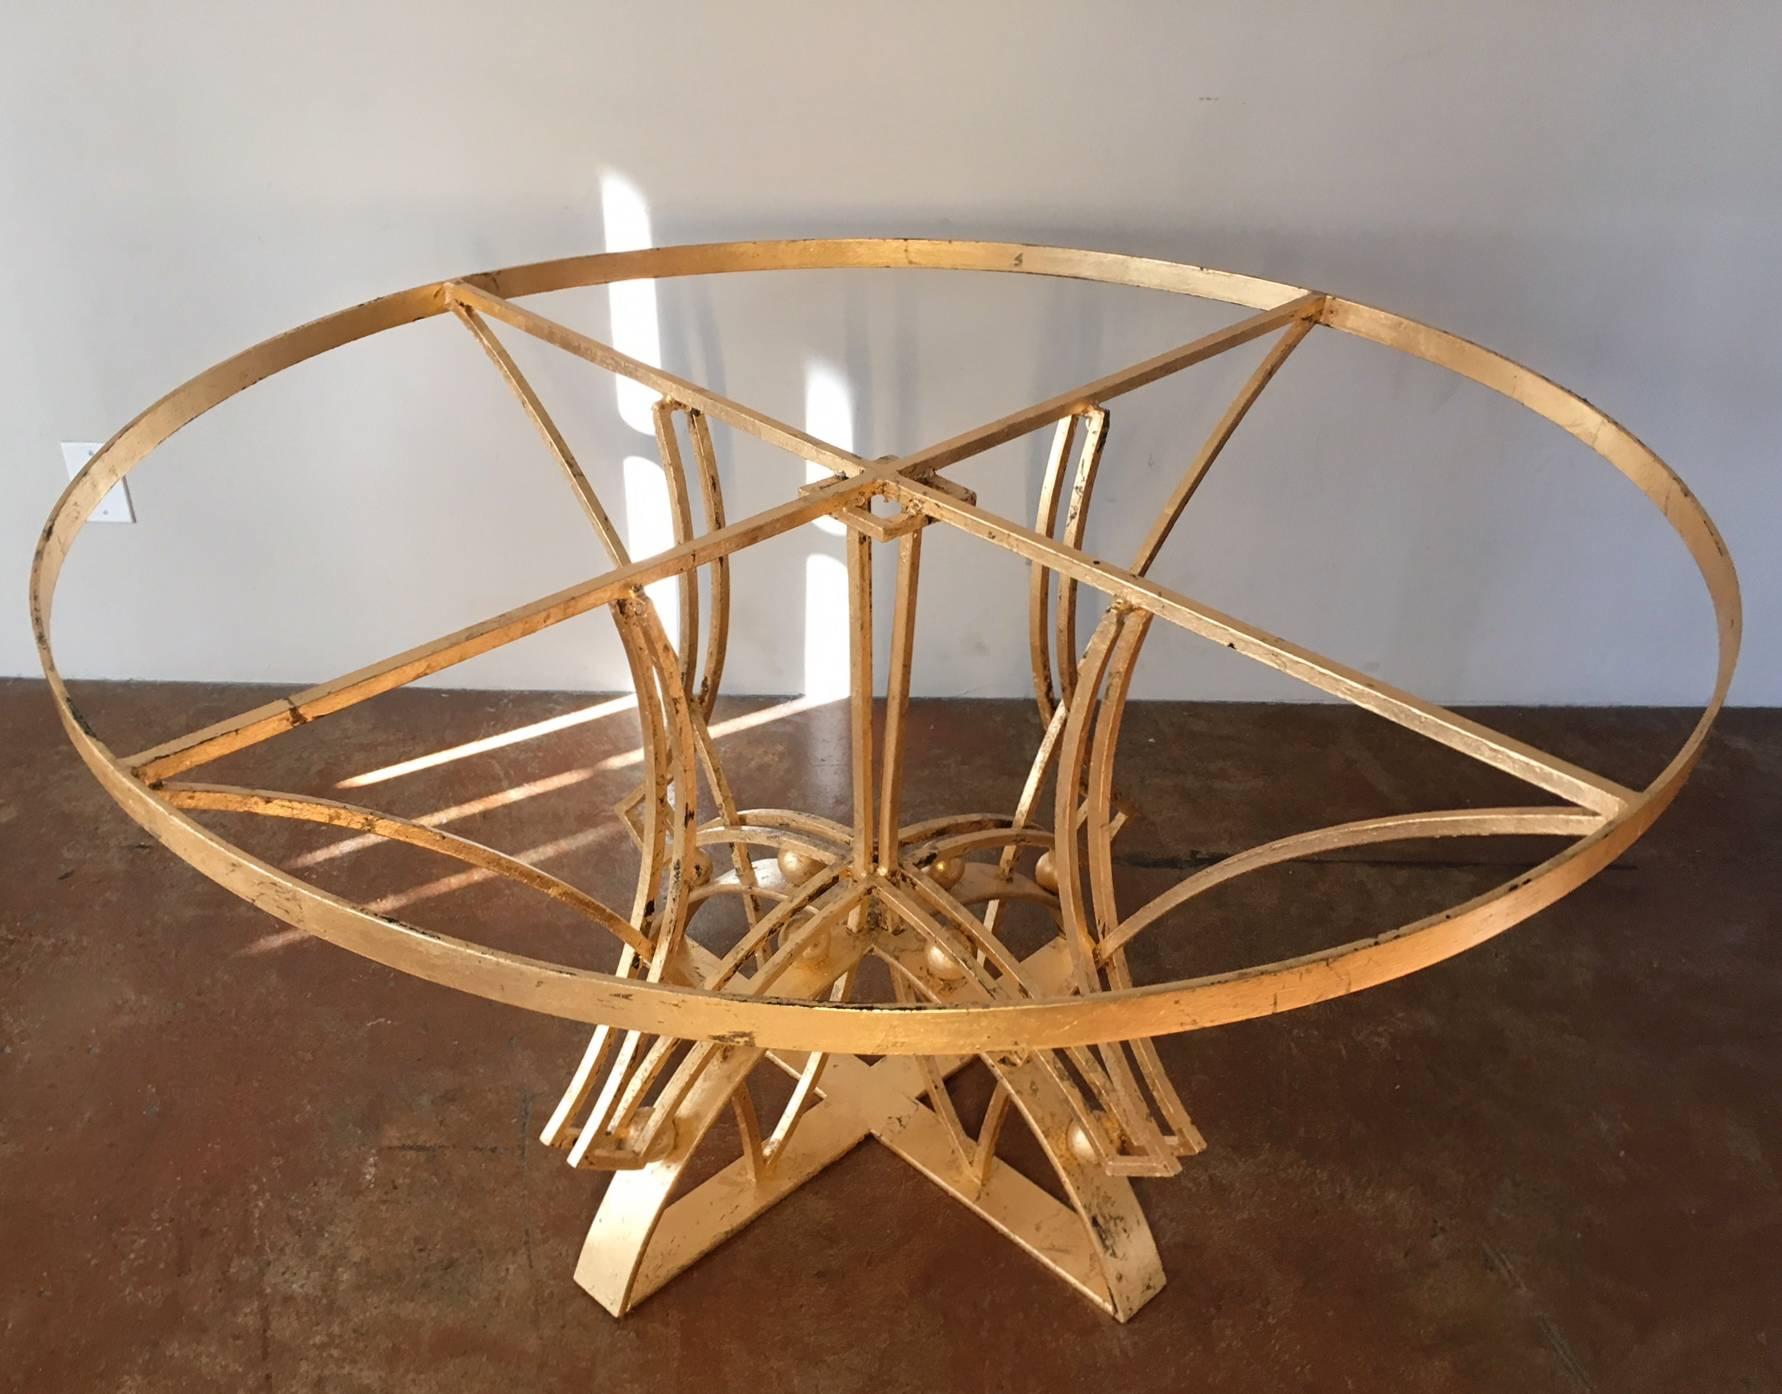 Mexican Stunning Arturo Pani Gilt Dining Table Base, Mexico City, 1950 For Sale